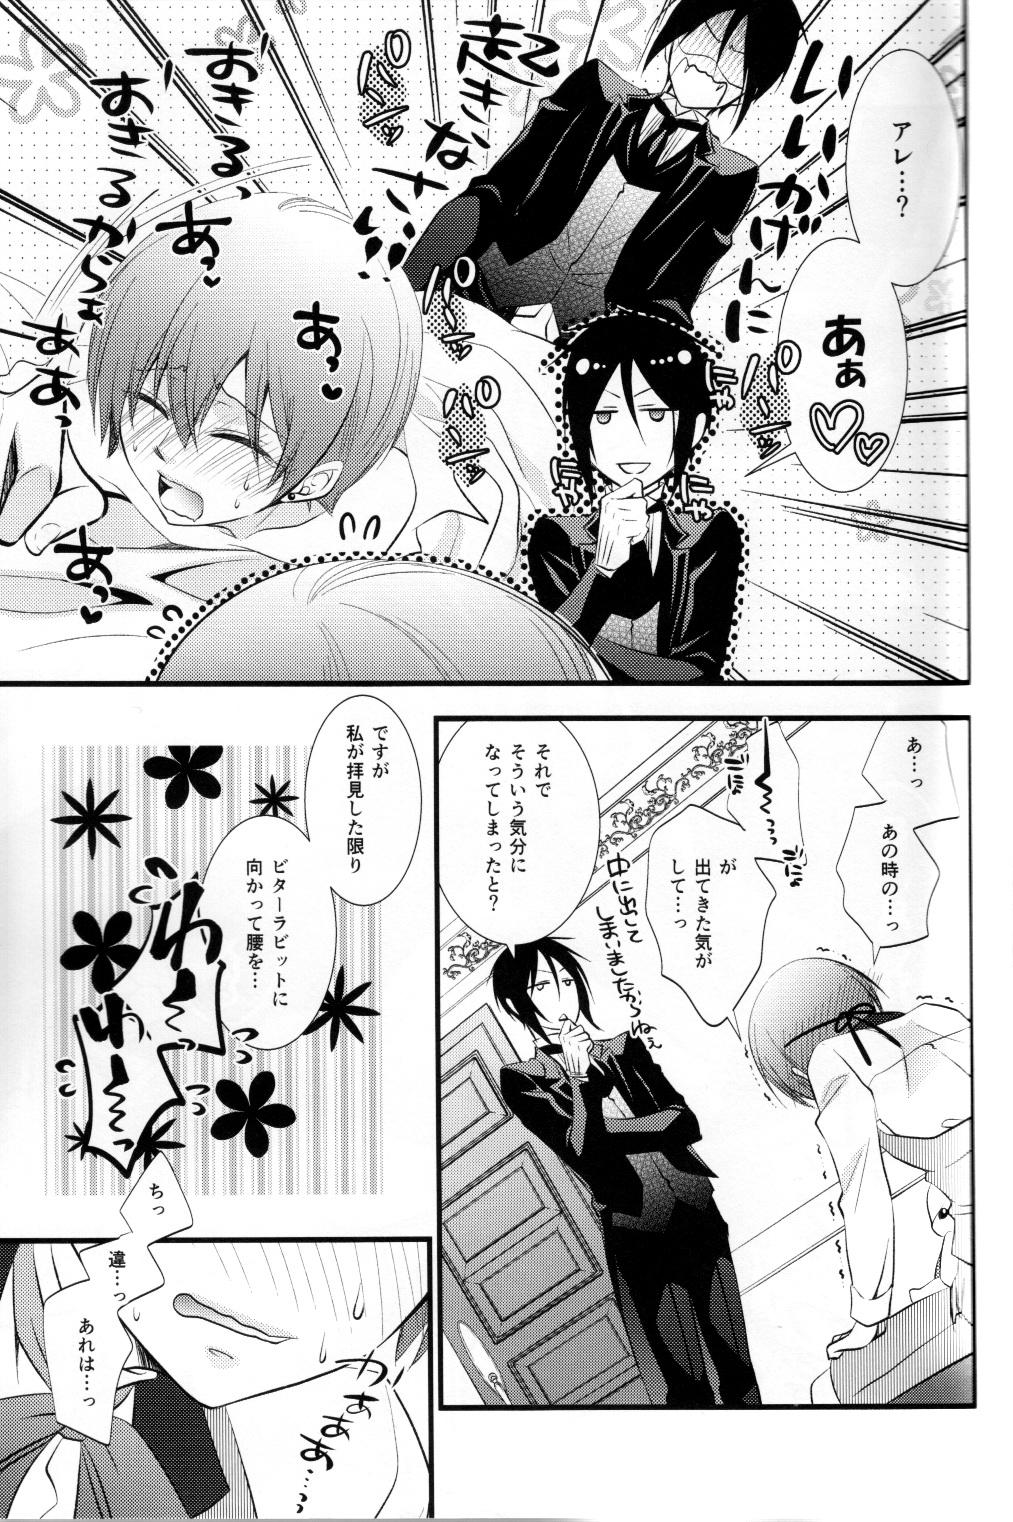 Canadian OASIS - Black butler Amatuer - Page 7